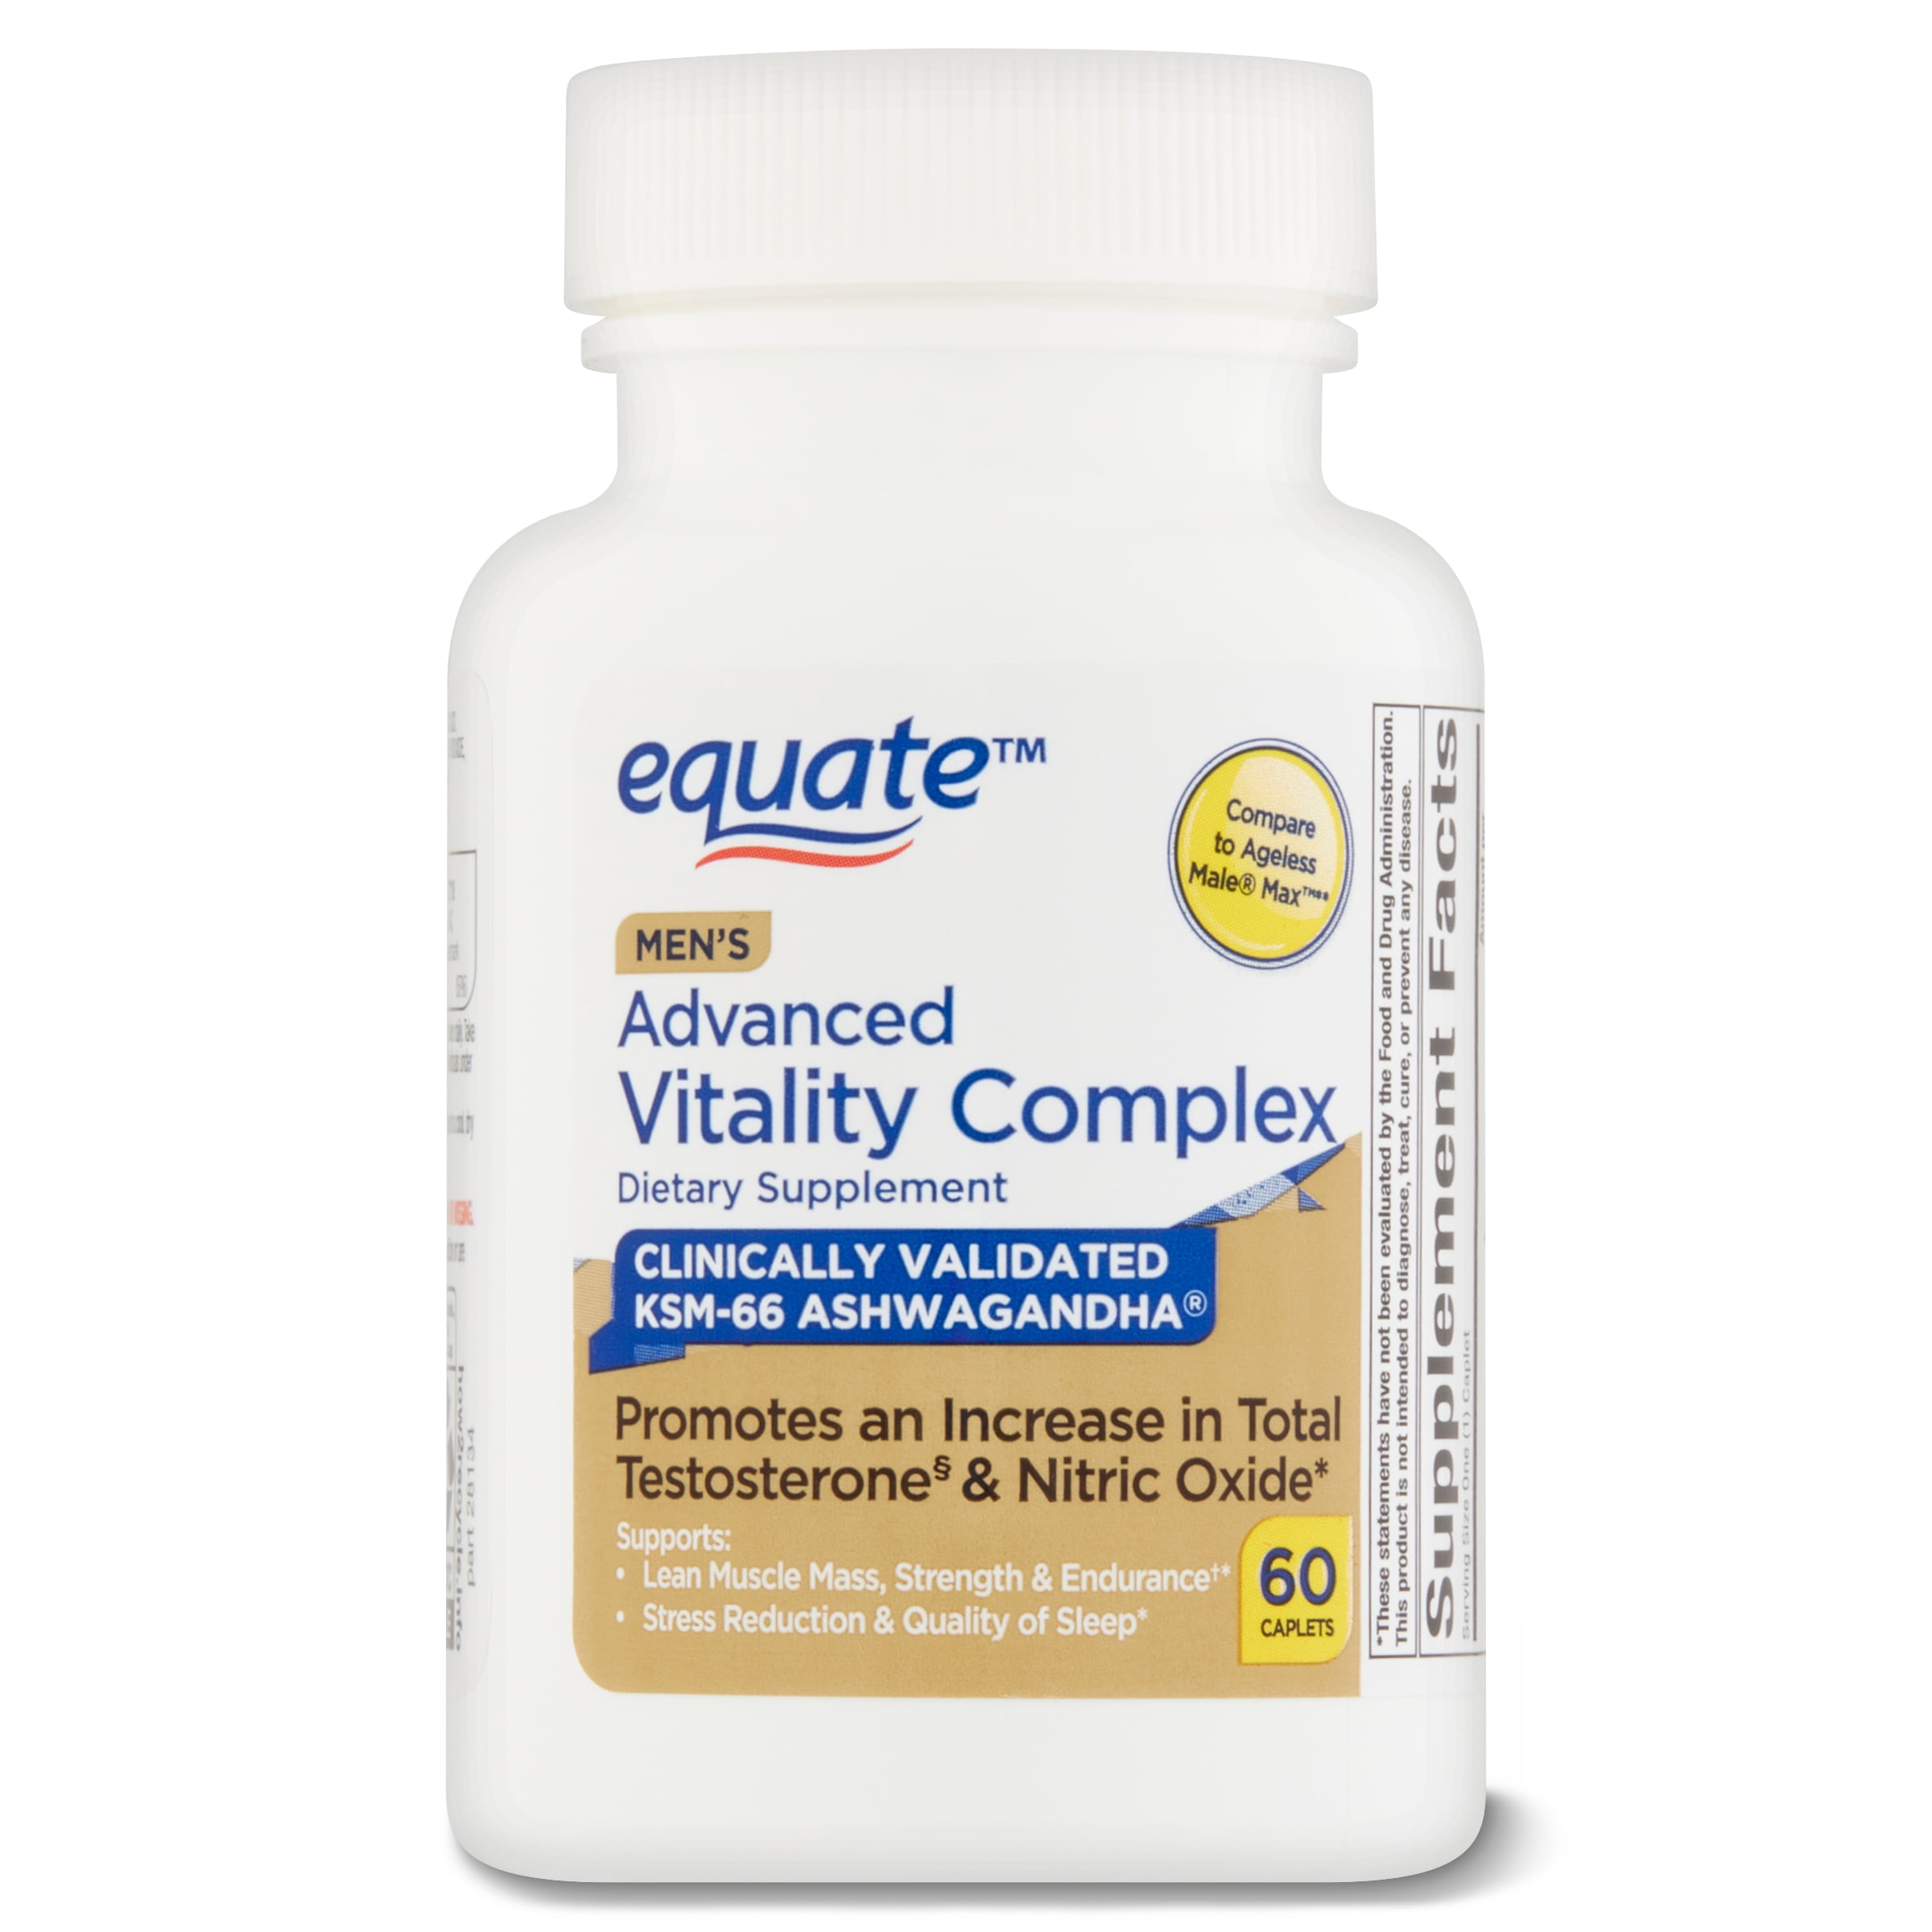 Equate Men's Advanced Vitality Complex with KSM-66 Ashwagandha, 60 Count